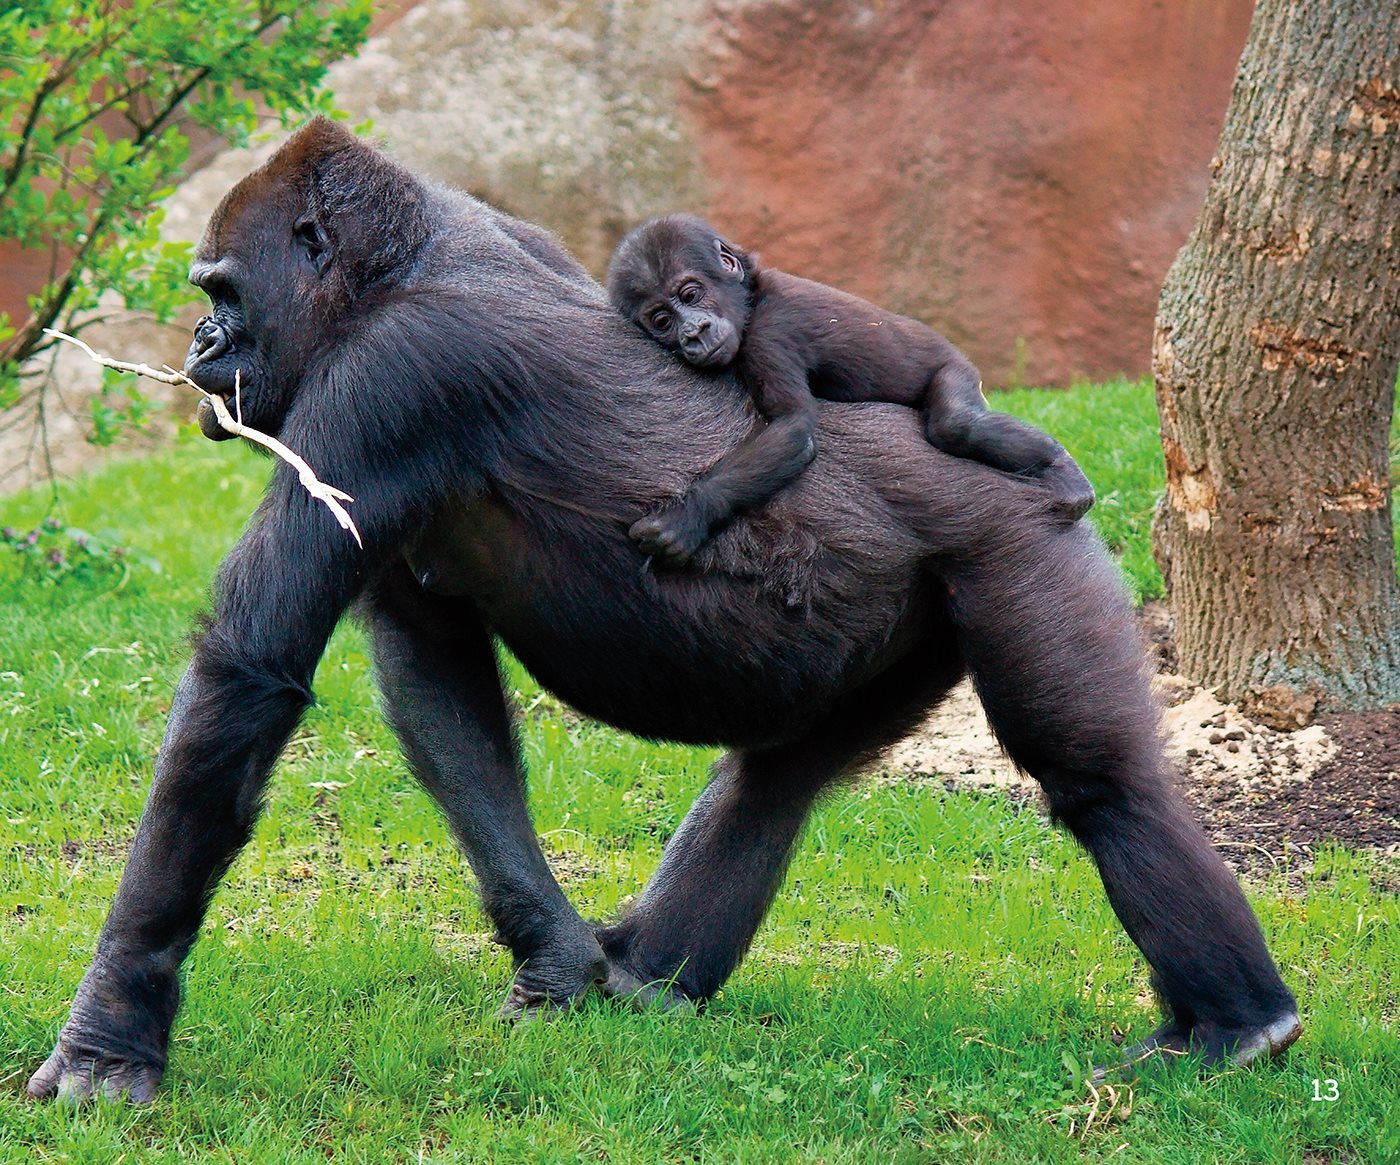 Growing Up Infants grow and become young gorillas Young gorillas play - photo 14